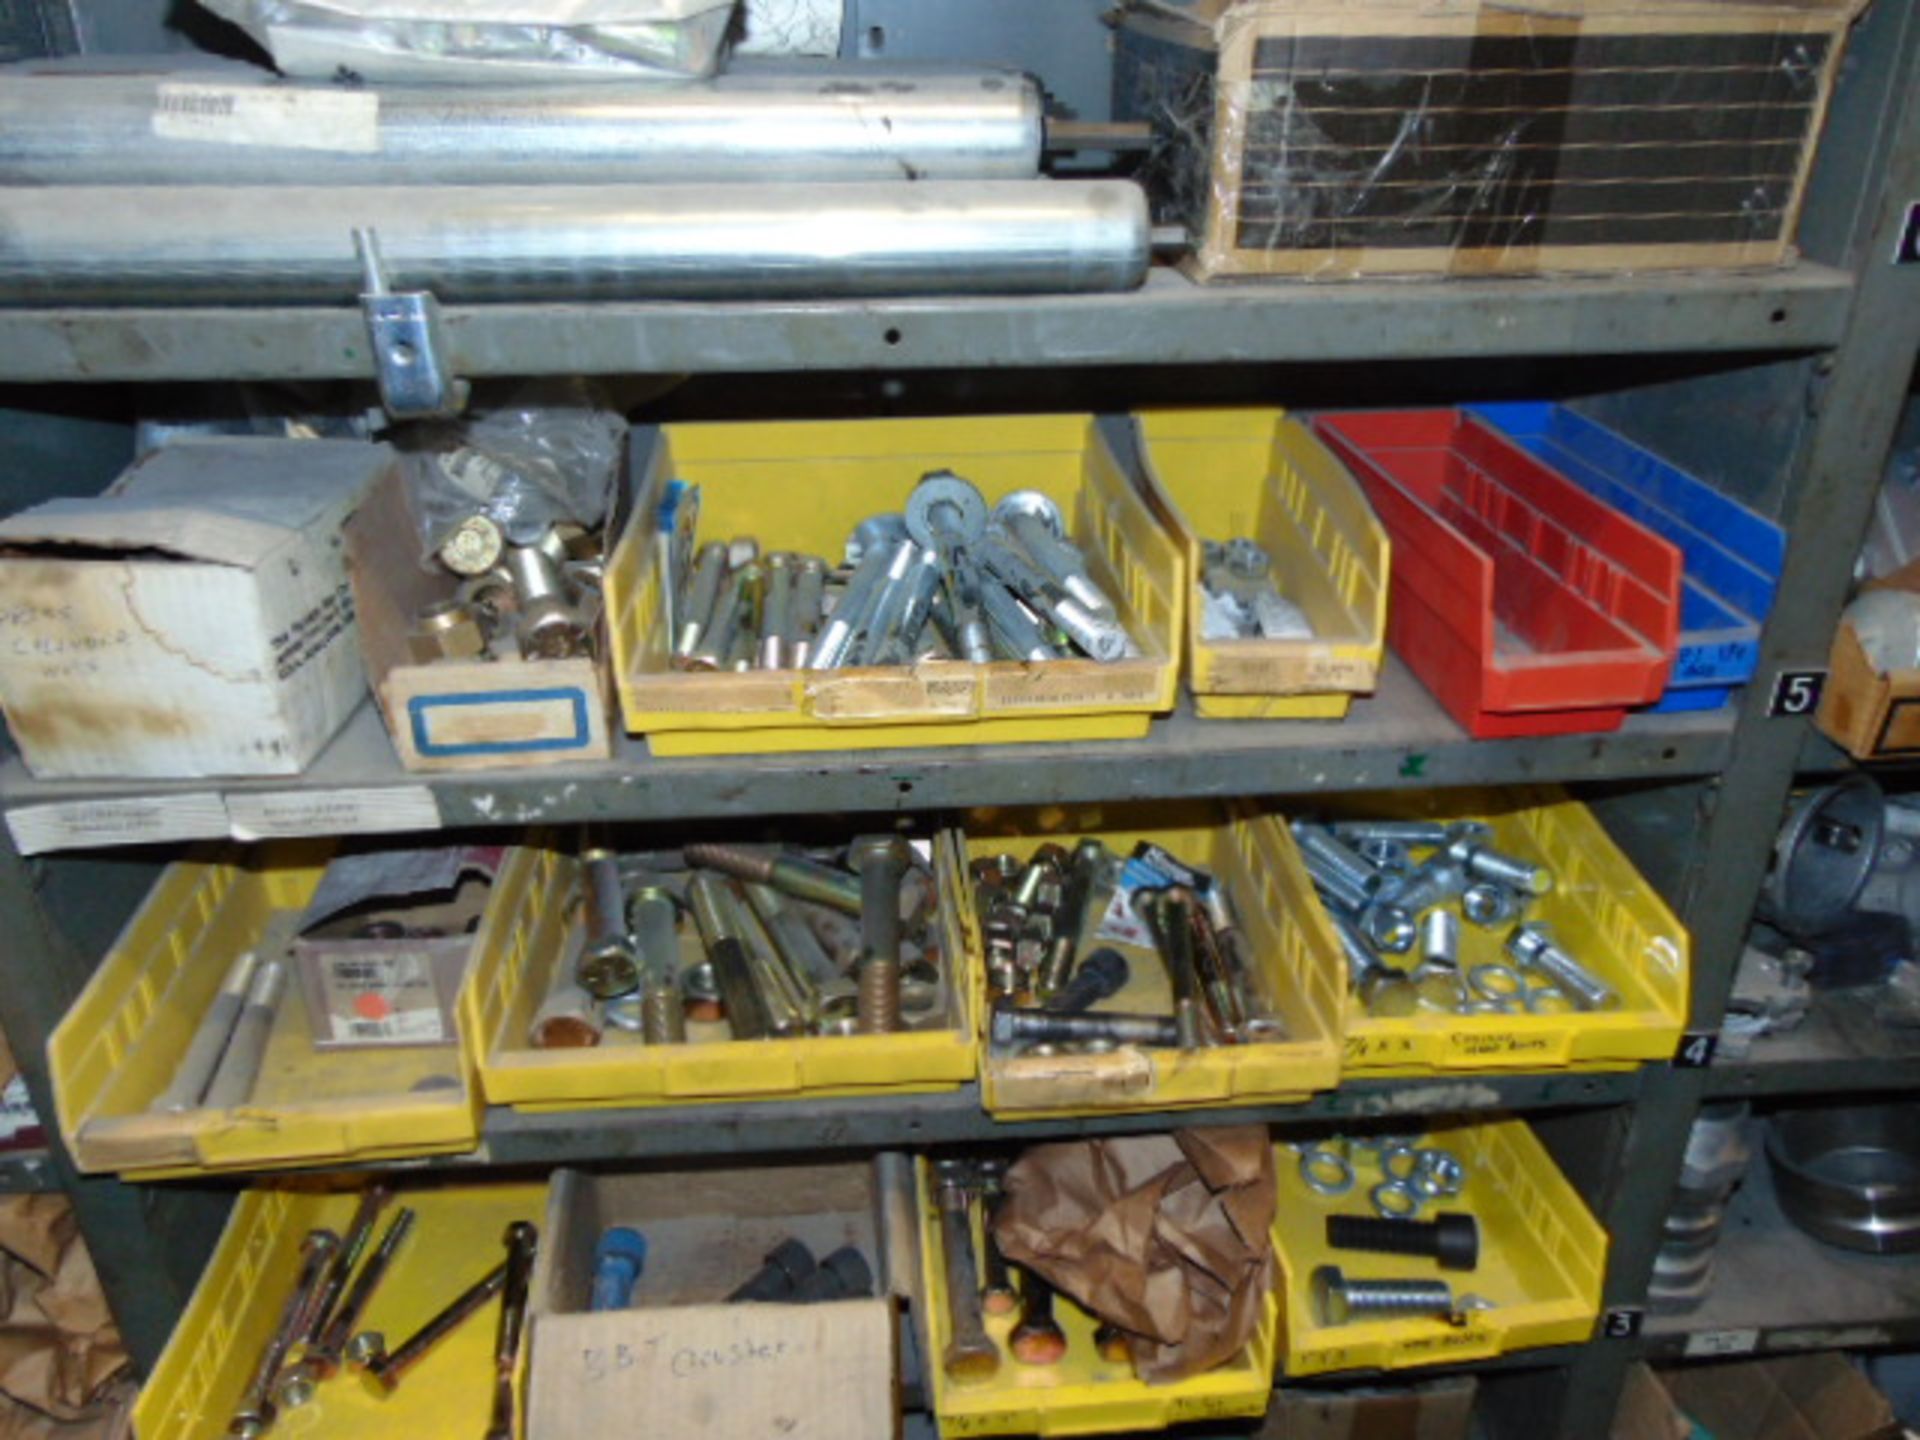 LOT CONSISTING OF: pipe seals, roller chain, gaskets, hose couplings, nuts & bolts, roller - Image 8 of 12